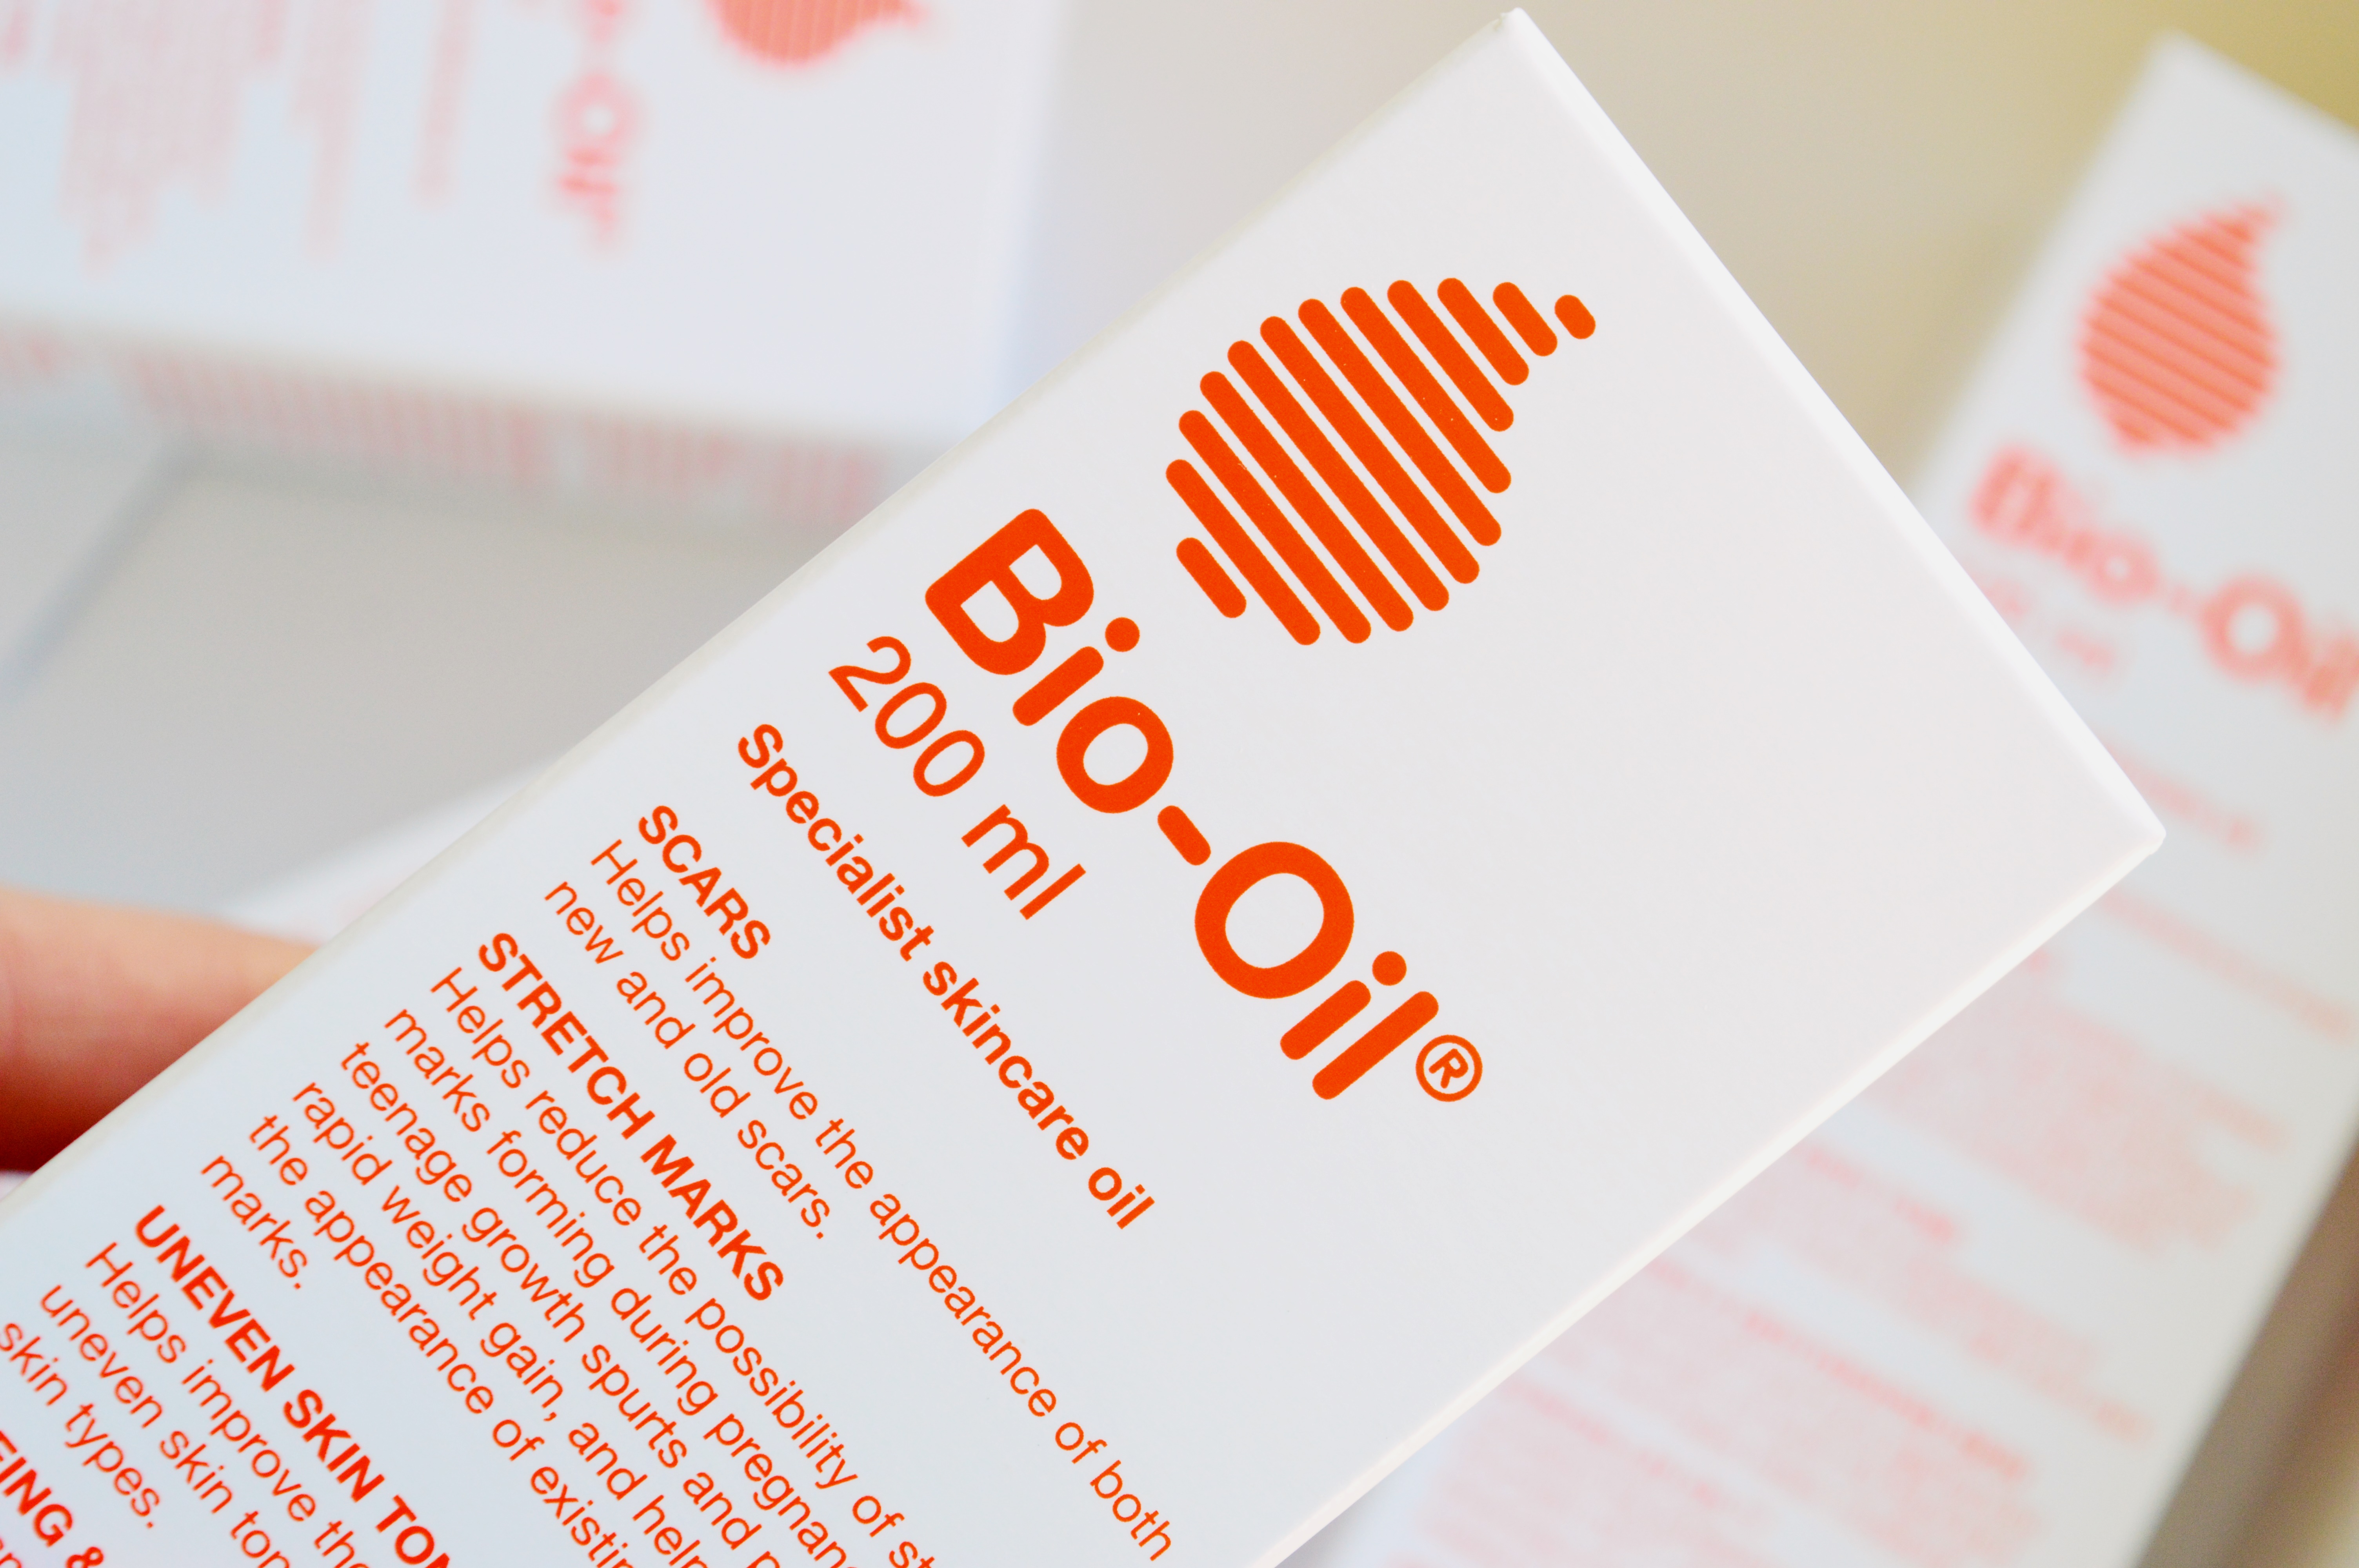 Bio-Oil has turned 30 and reveals new packaging & baby sized bottle! {HERE’S & THERE’S}